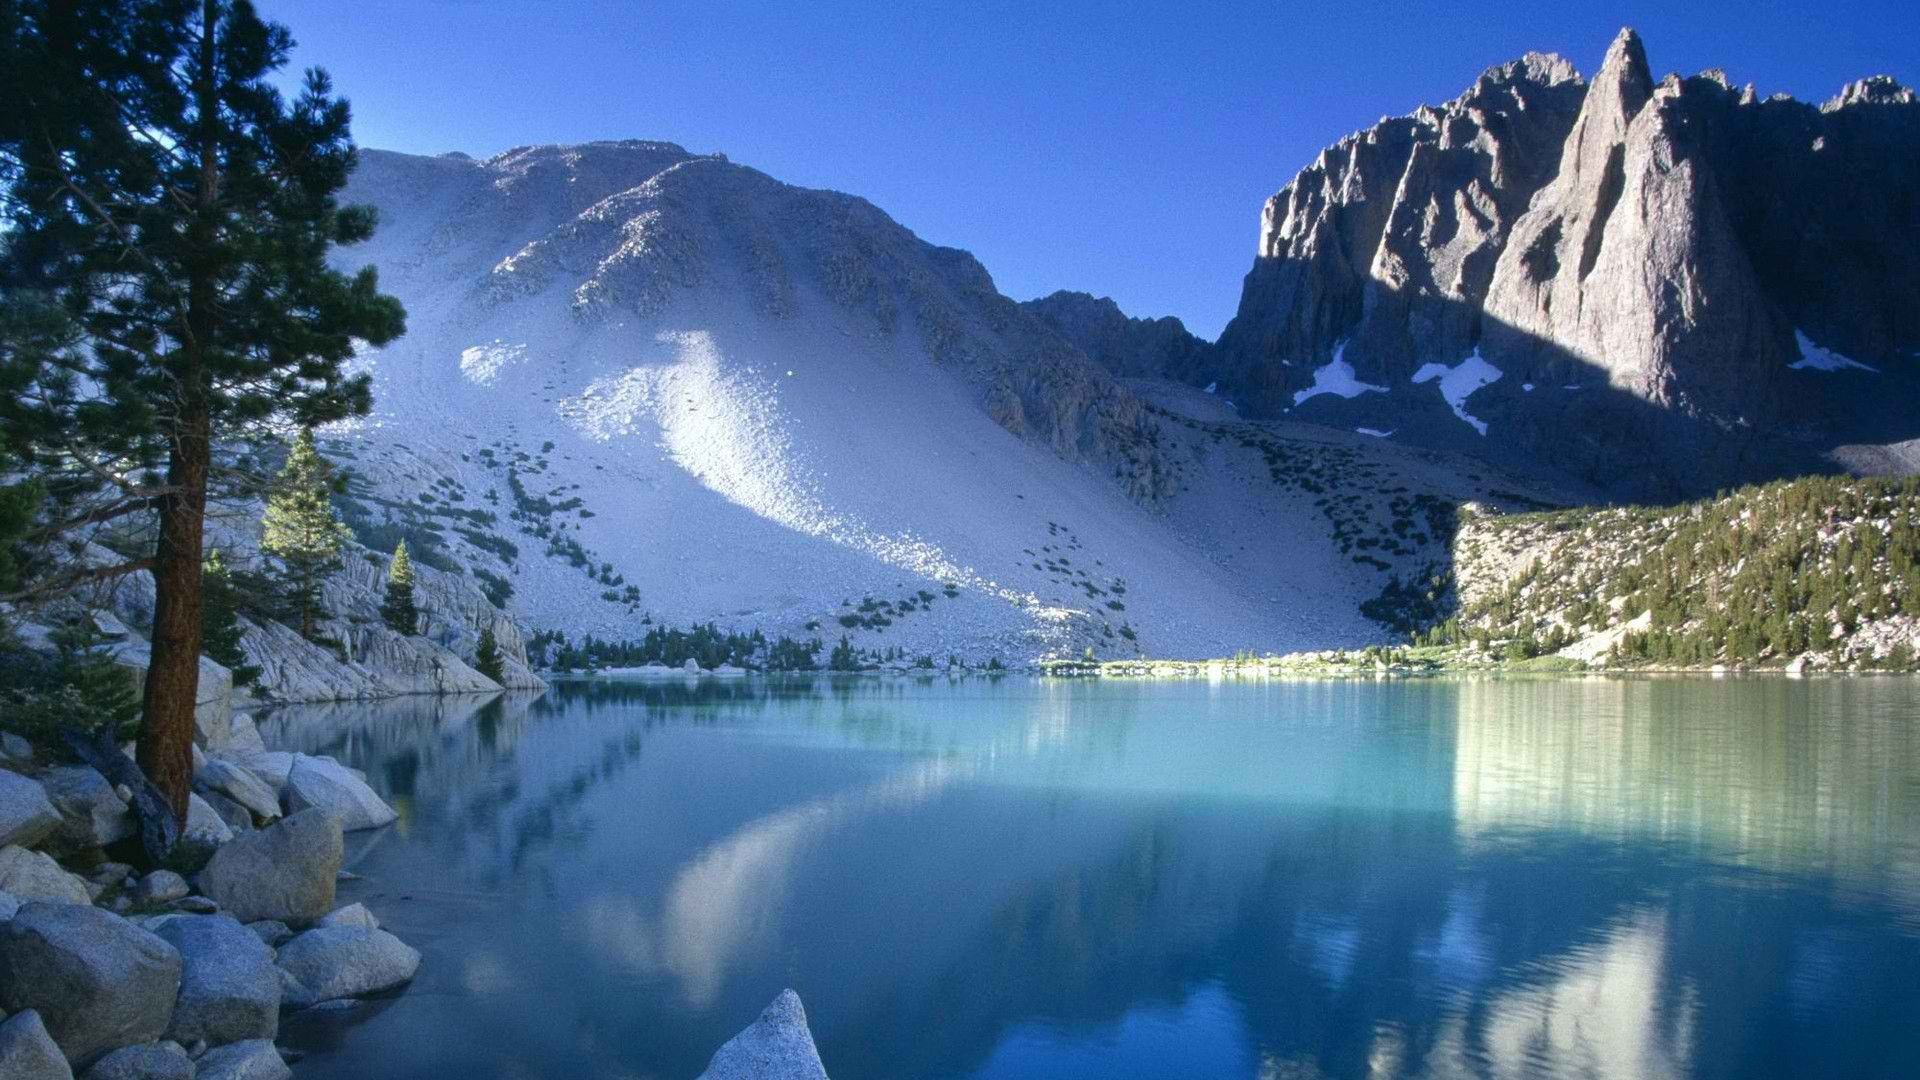 Blue Mountains Dual Monitor Wallpaper | HD Wallpapers Download